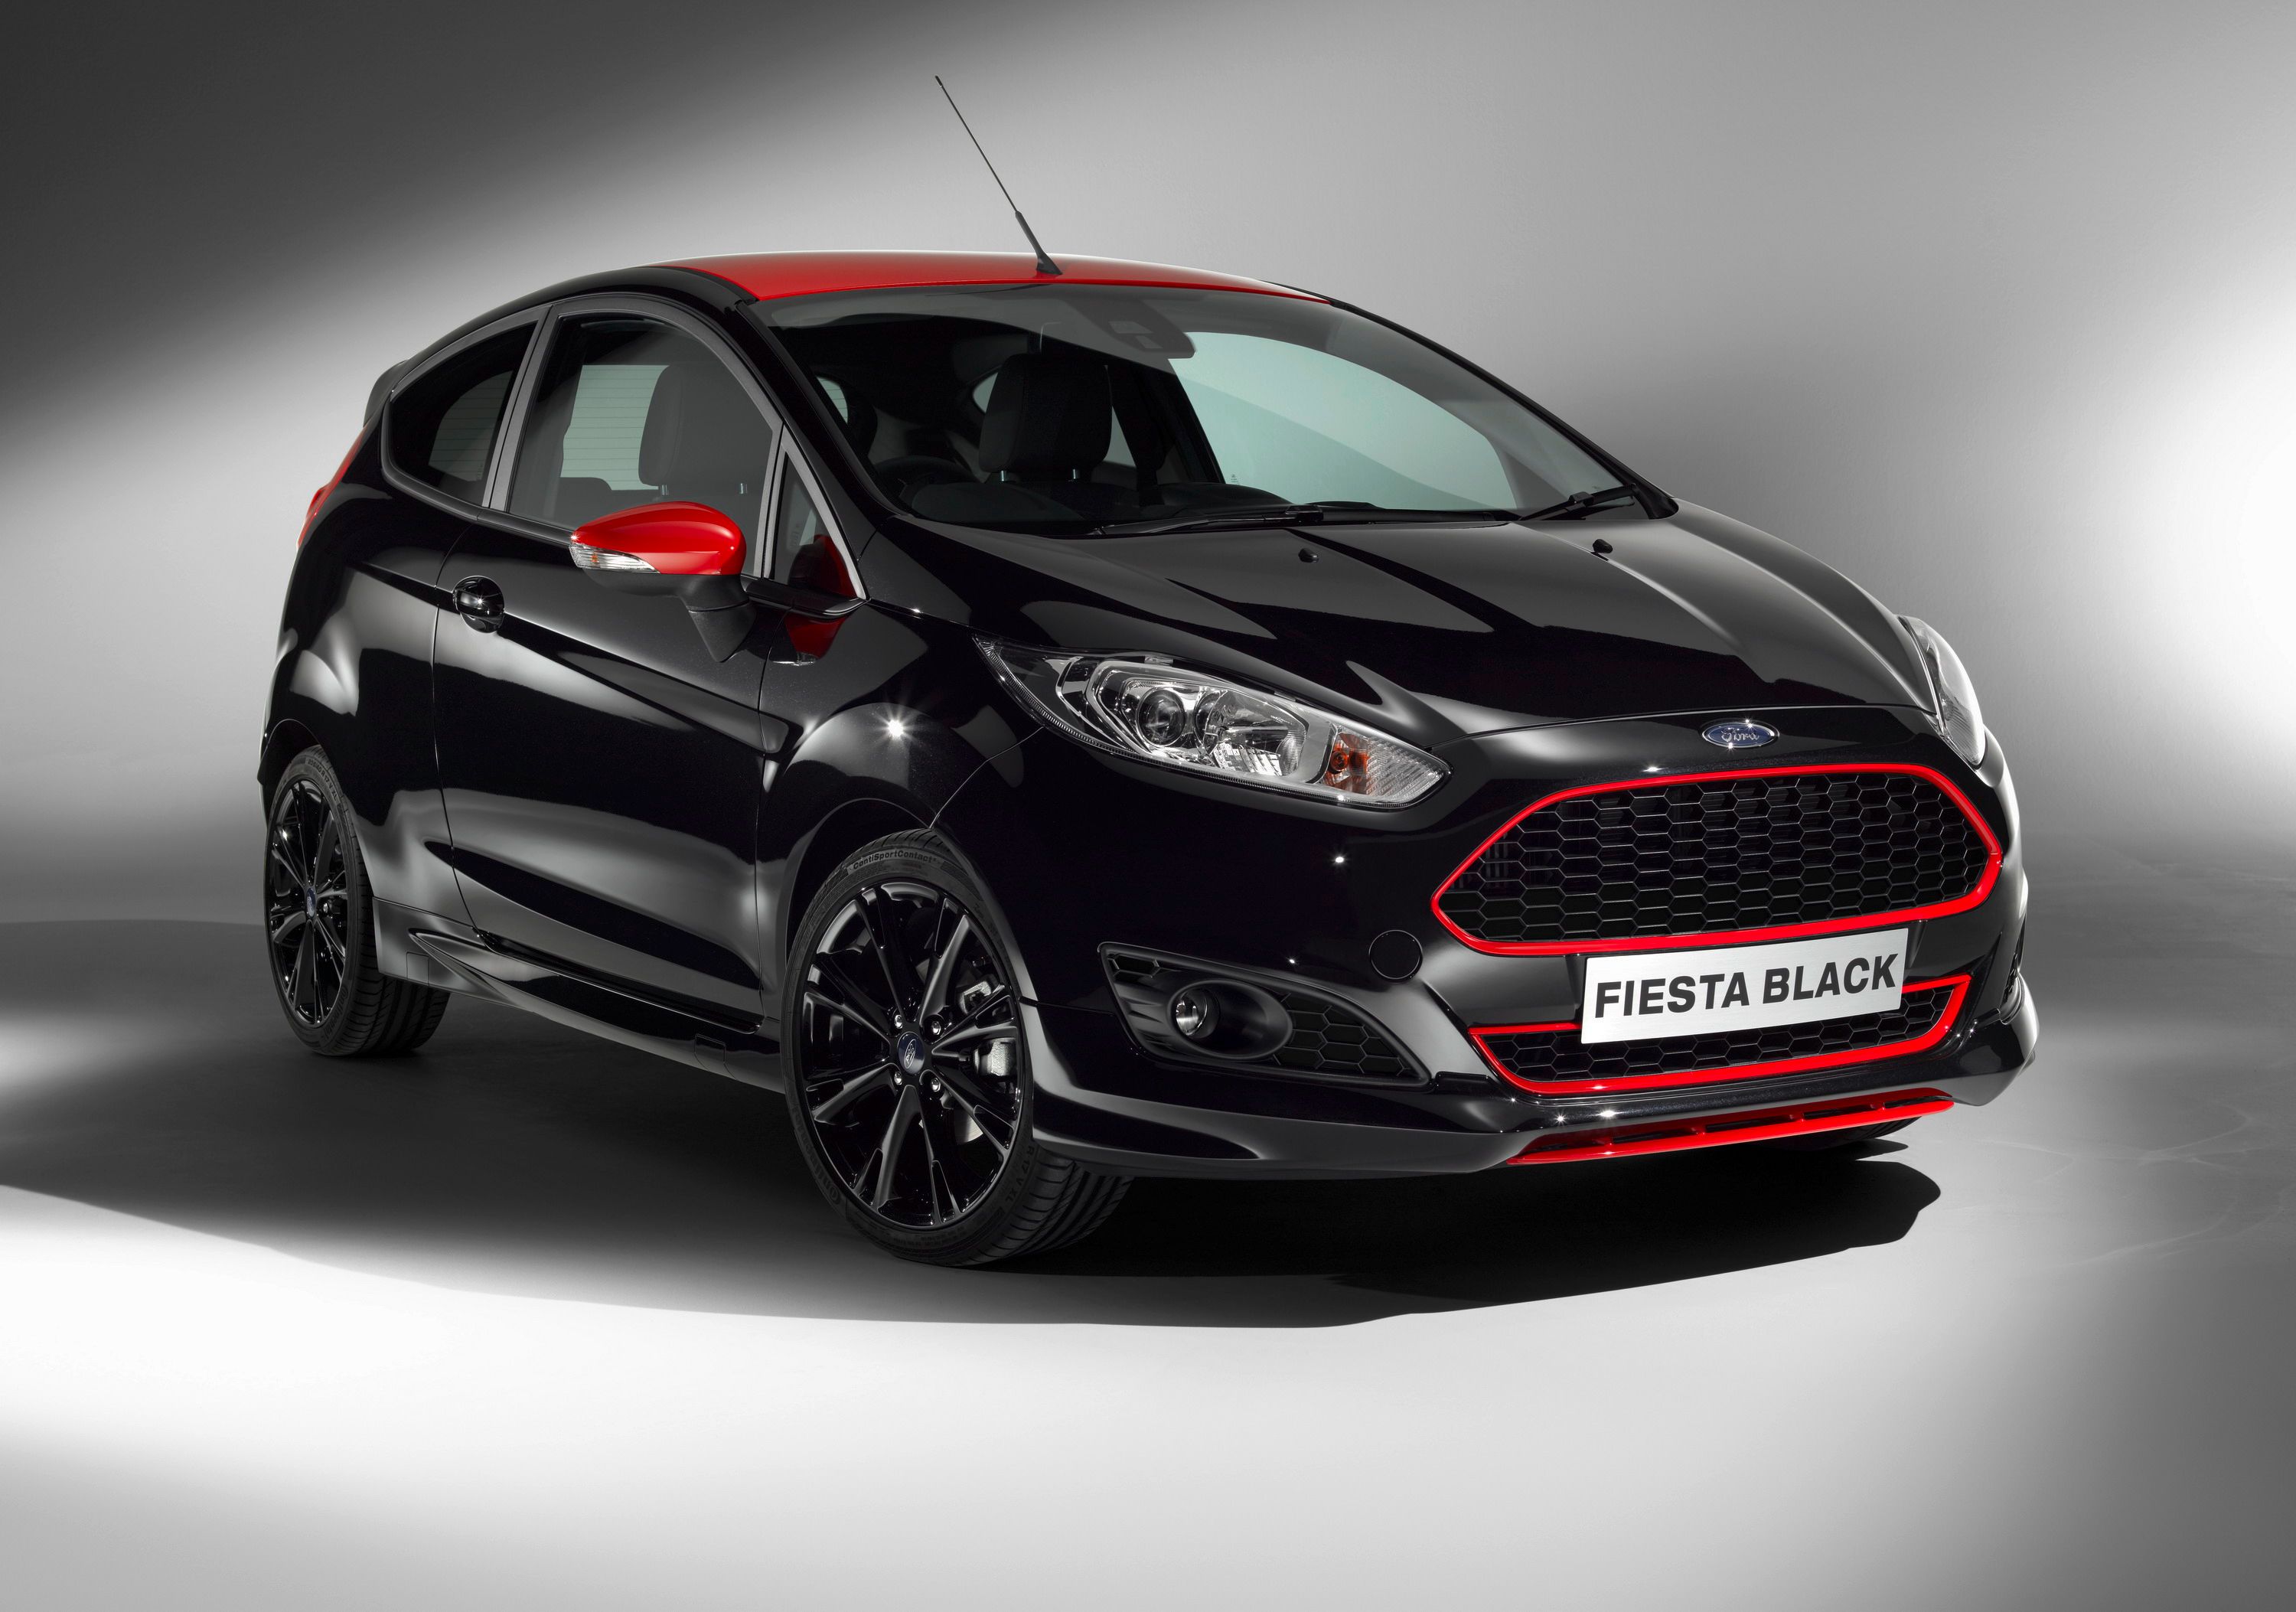 2014 Ford Fiesta Black and Red Edition